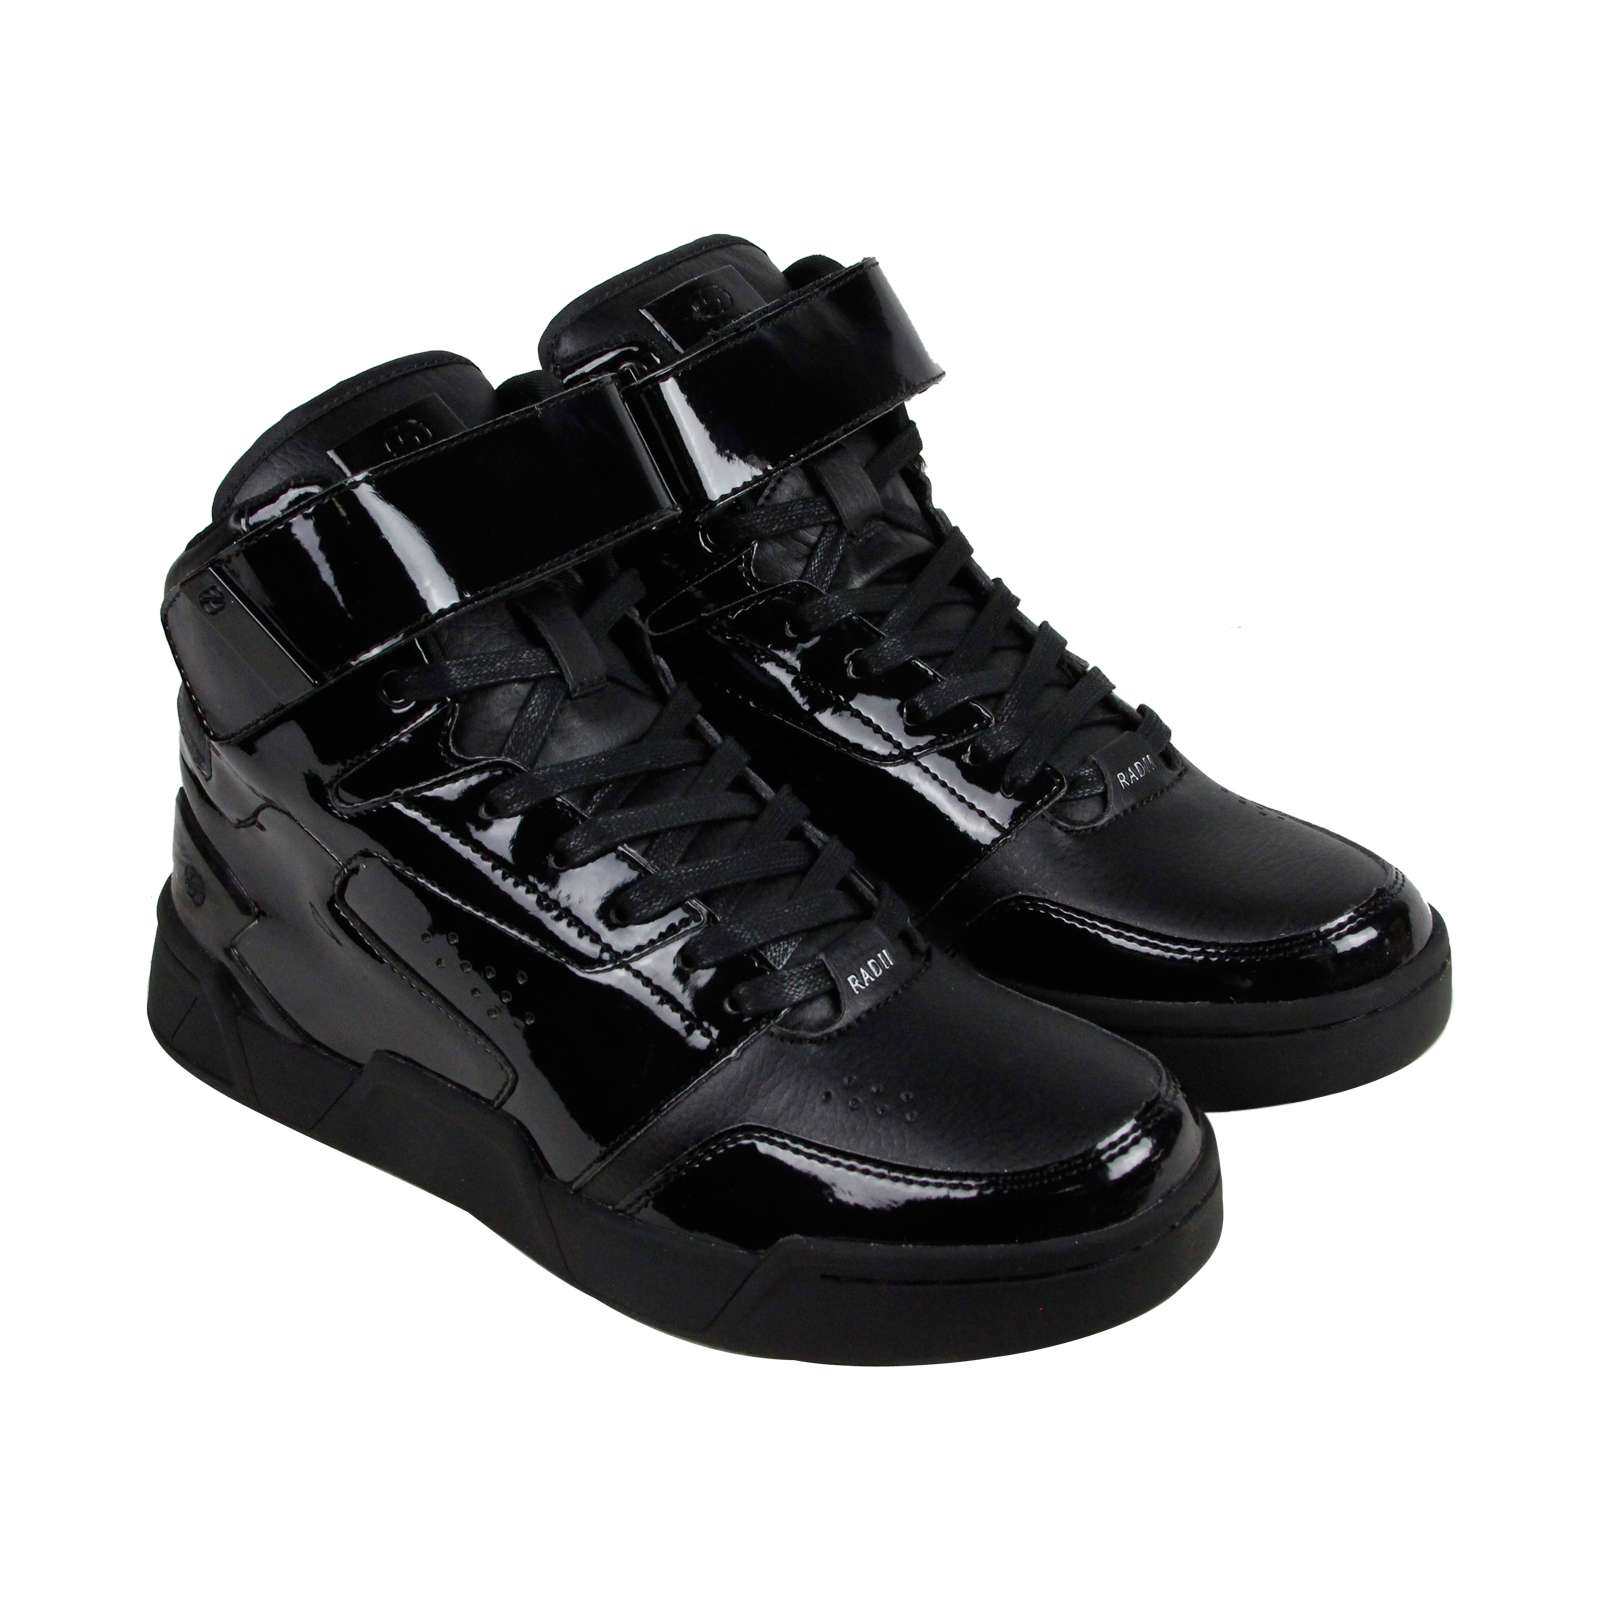 Radii Segment Mens Black Patent Leather High Top Lace Up ...